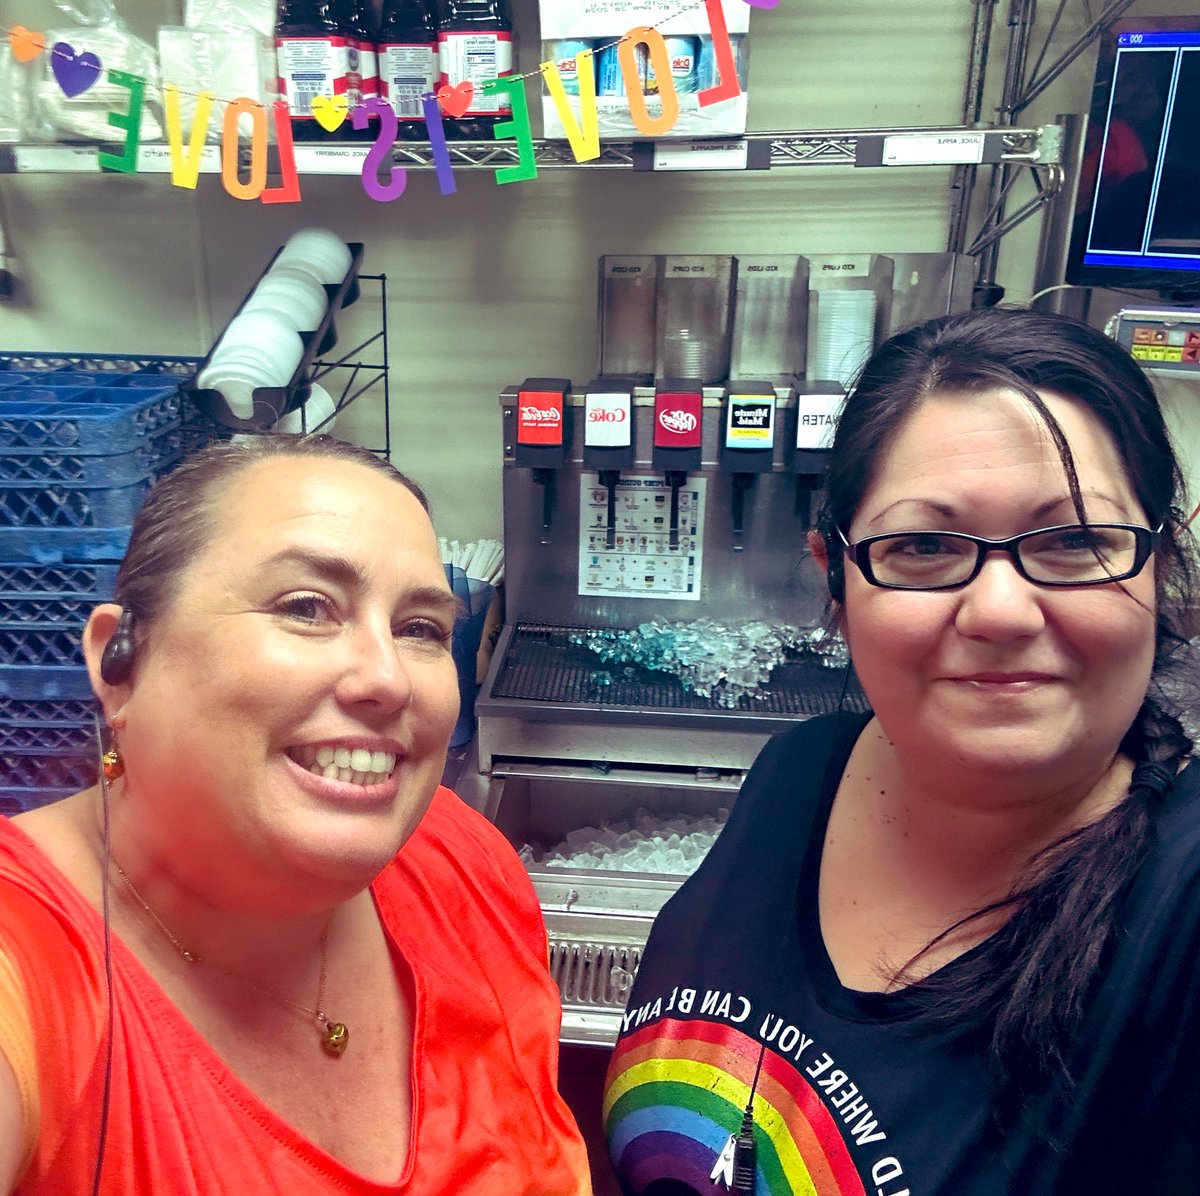 Celebrating #Pride2023.  I #chilislove our passion for diversity and inclusion. #cultureday #chilislove #youmatter #BeYou #Bekind #loveislove